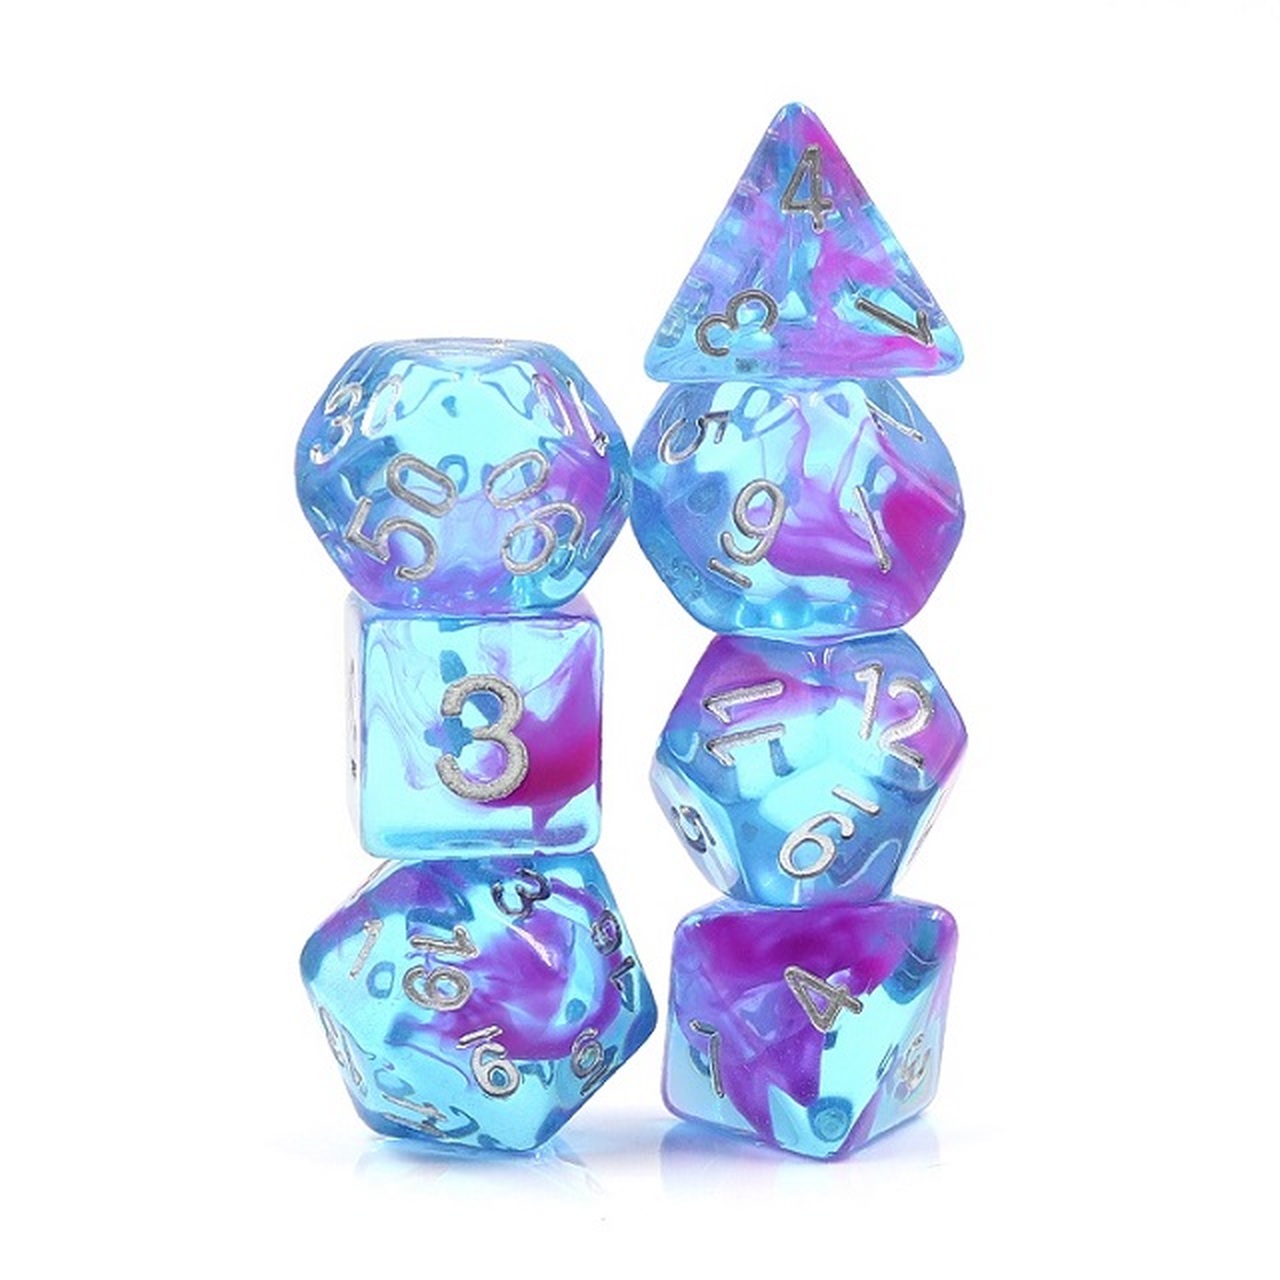 DND dice that are pink and blue